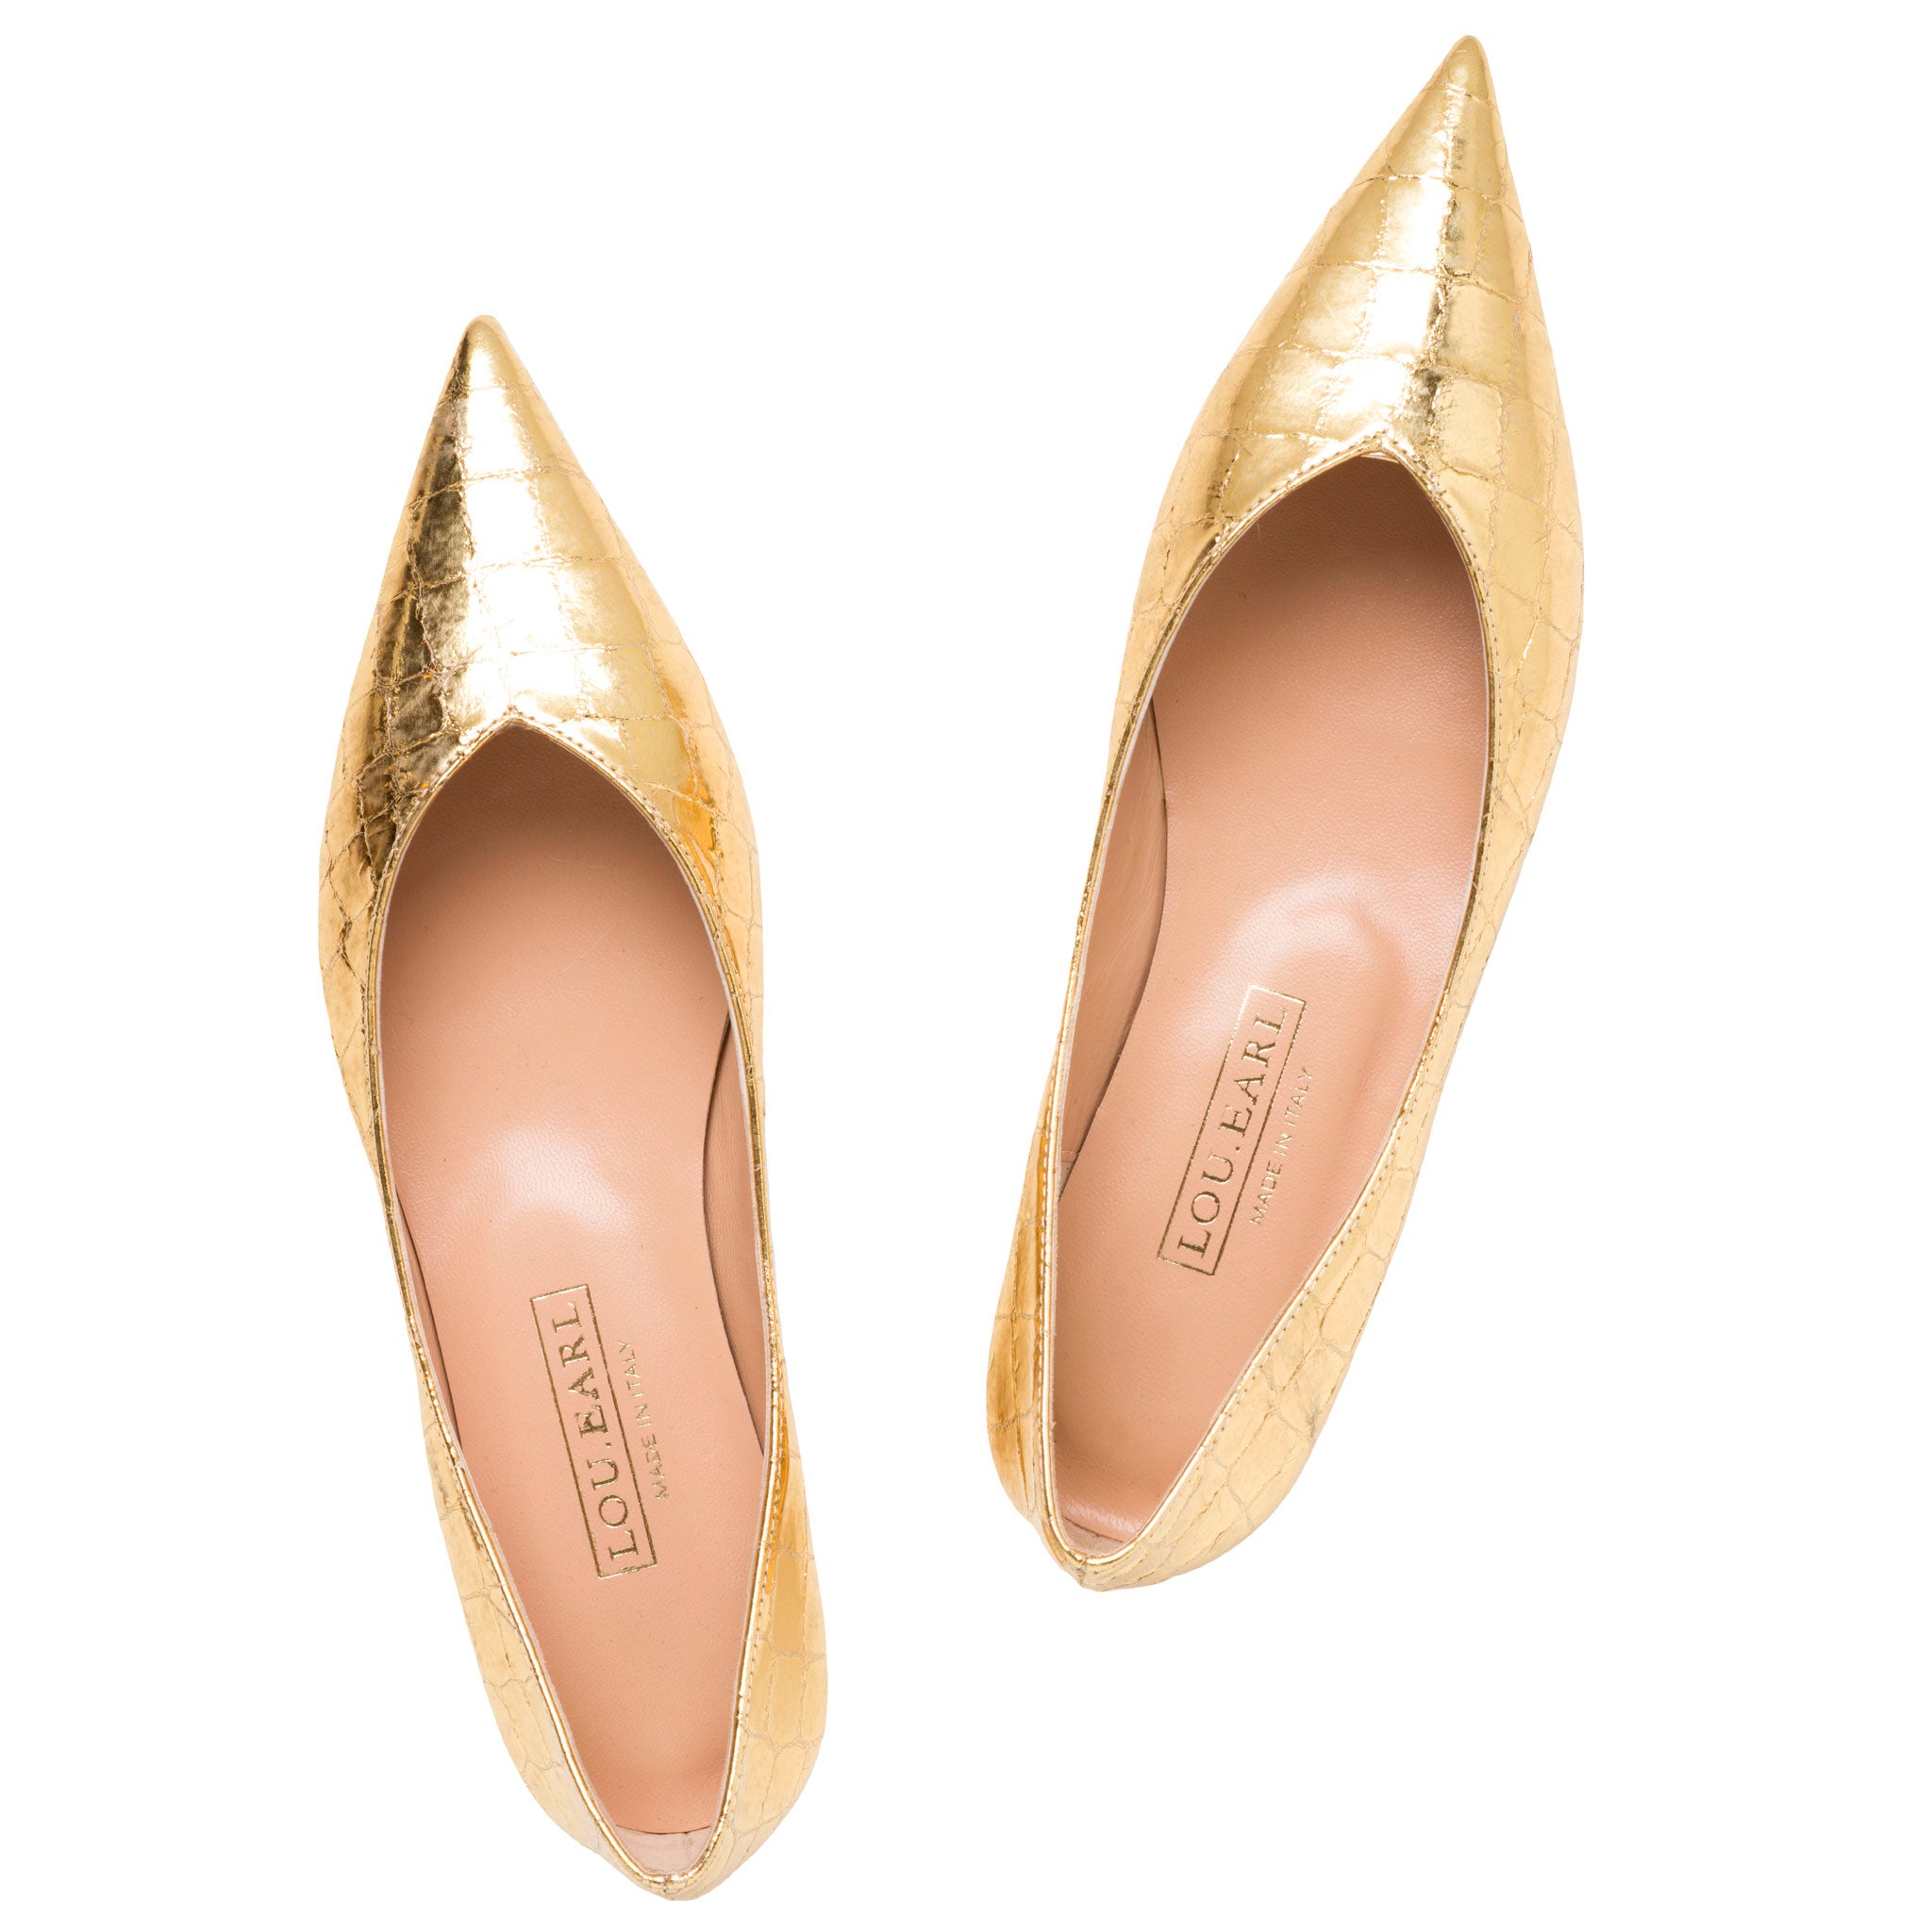 gold croco ultra pointed toe flat shoes for women in shiny metallic, slip on pointy ballet flats